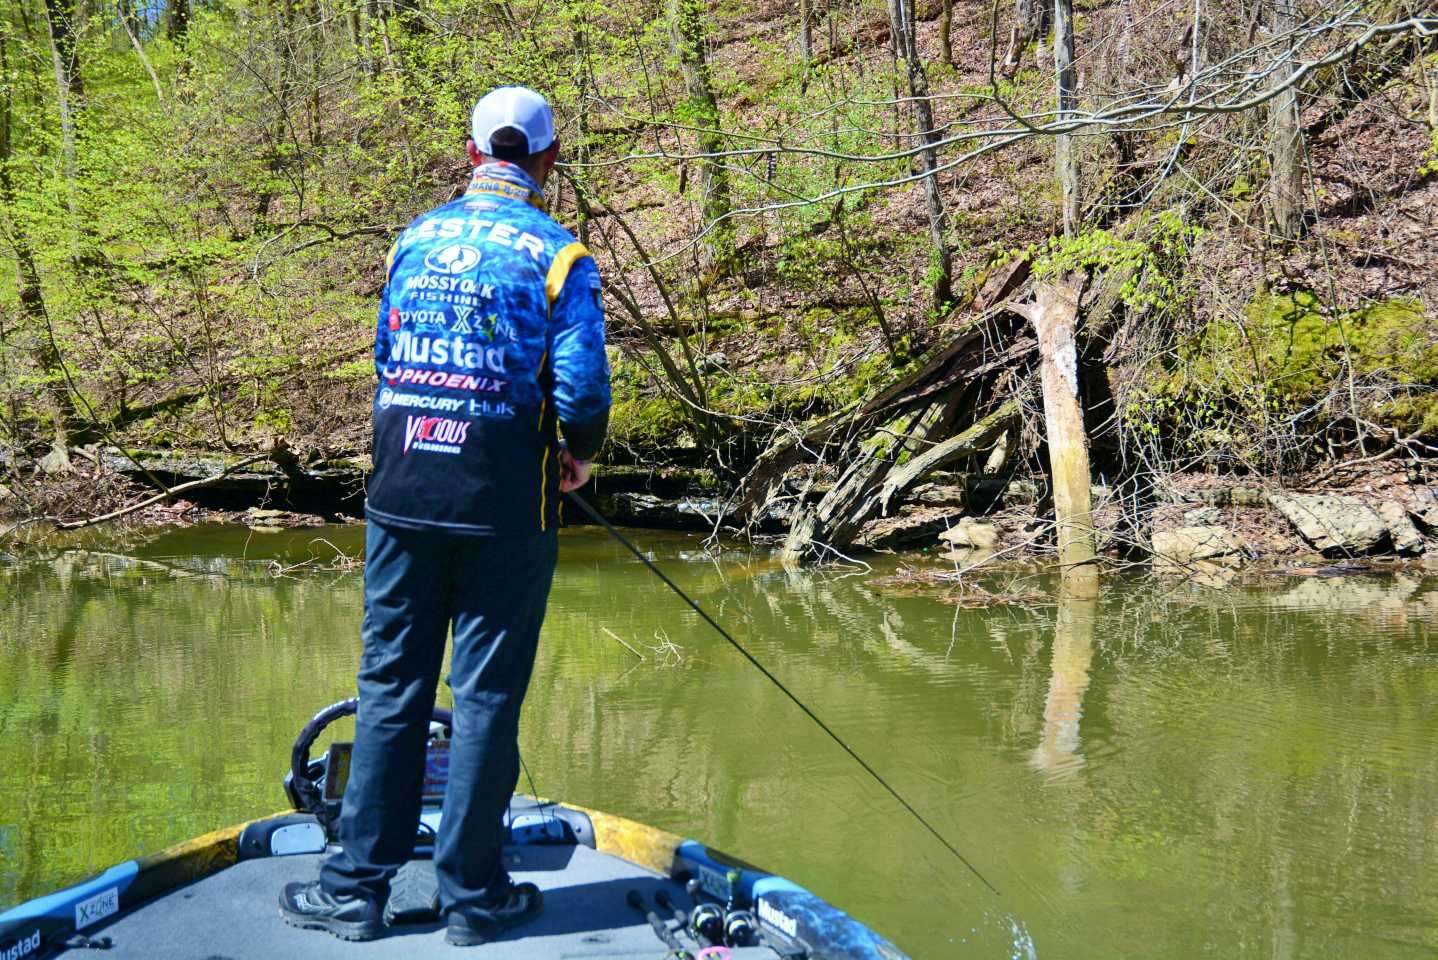 The lure and tackle details will be revealed at the end of the slide show. In the meantime, hereâs a tip from Lester about this spot. âIâm throwing the Spook Jr. on braided line, a fluorocarbon leader and a soft rod tip. I can get better walking action using that setup.â
